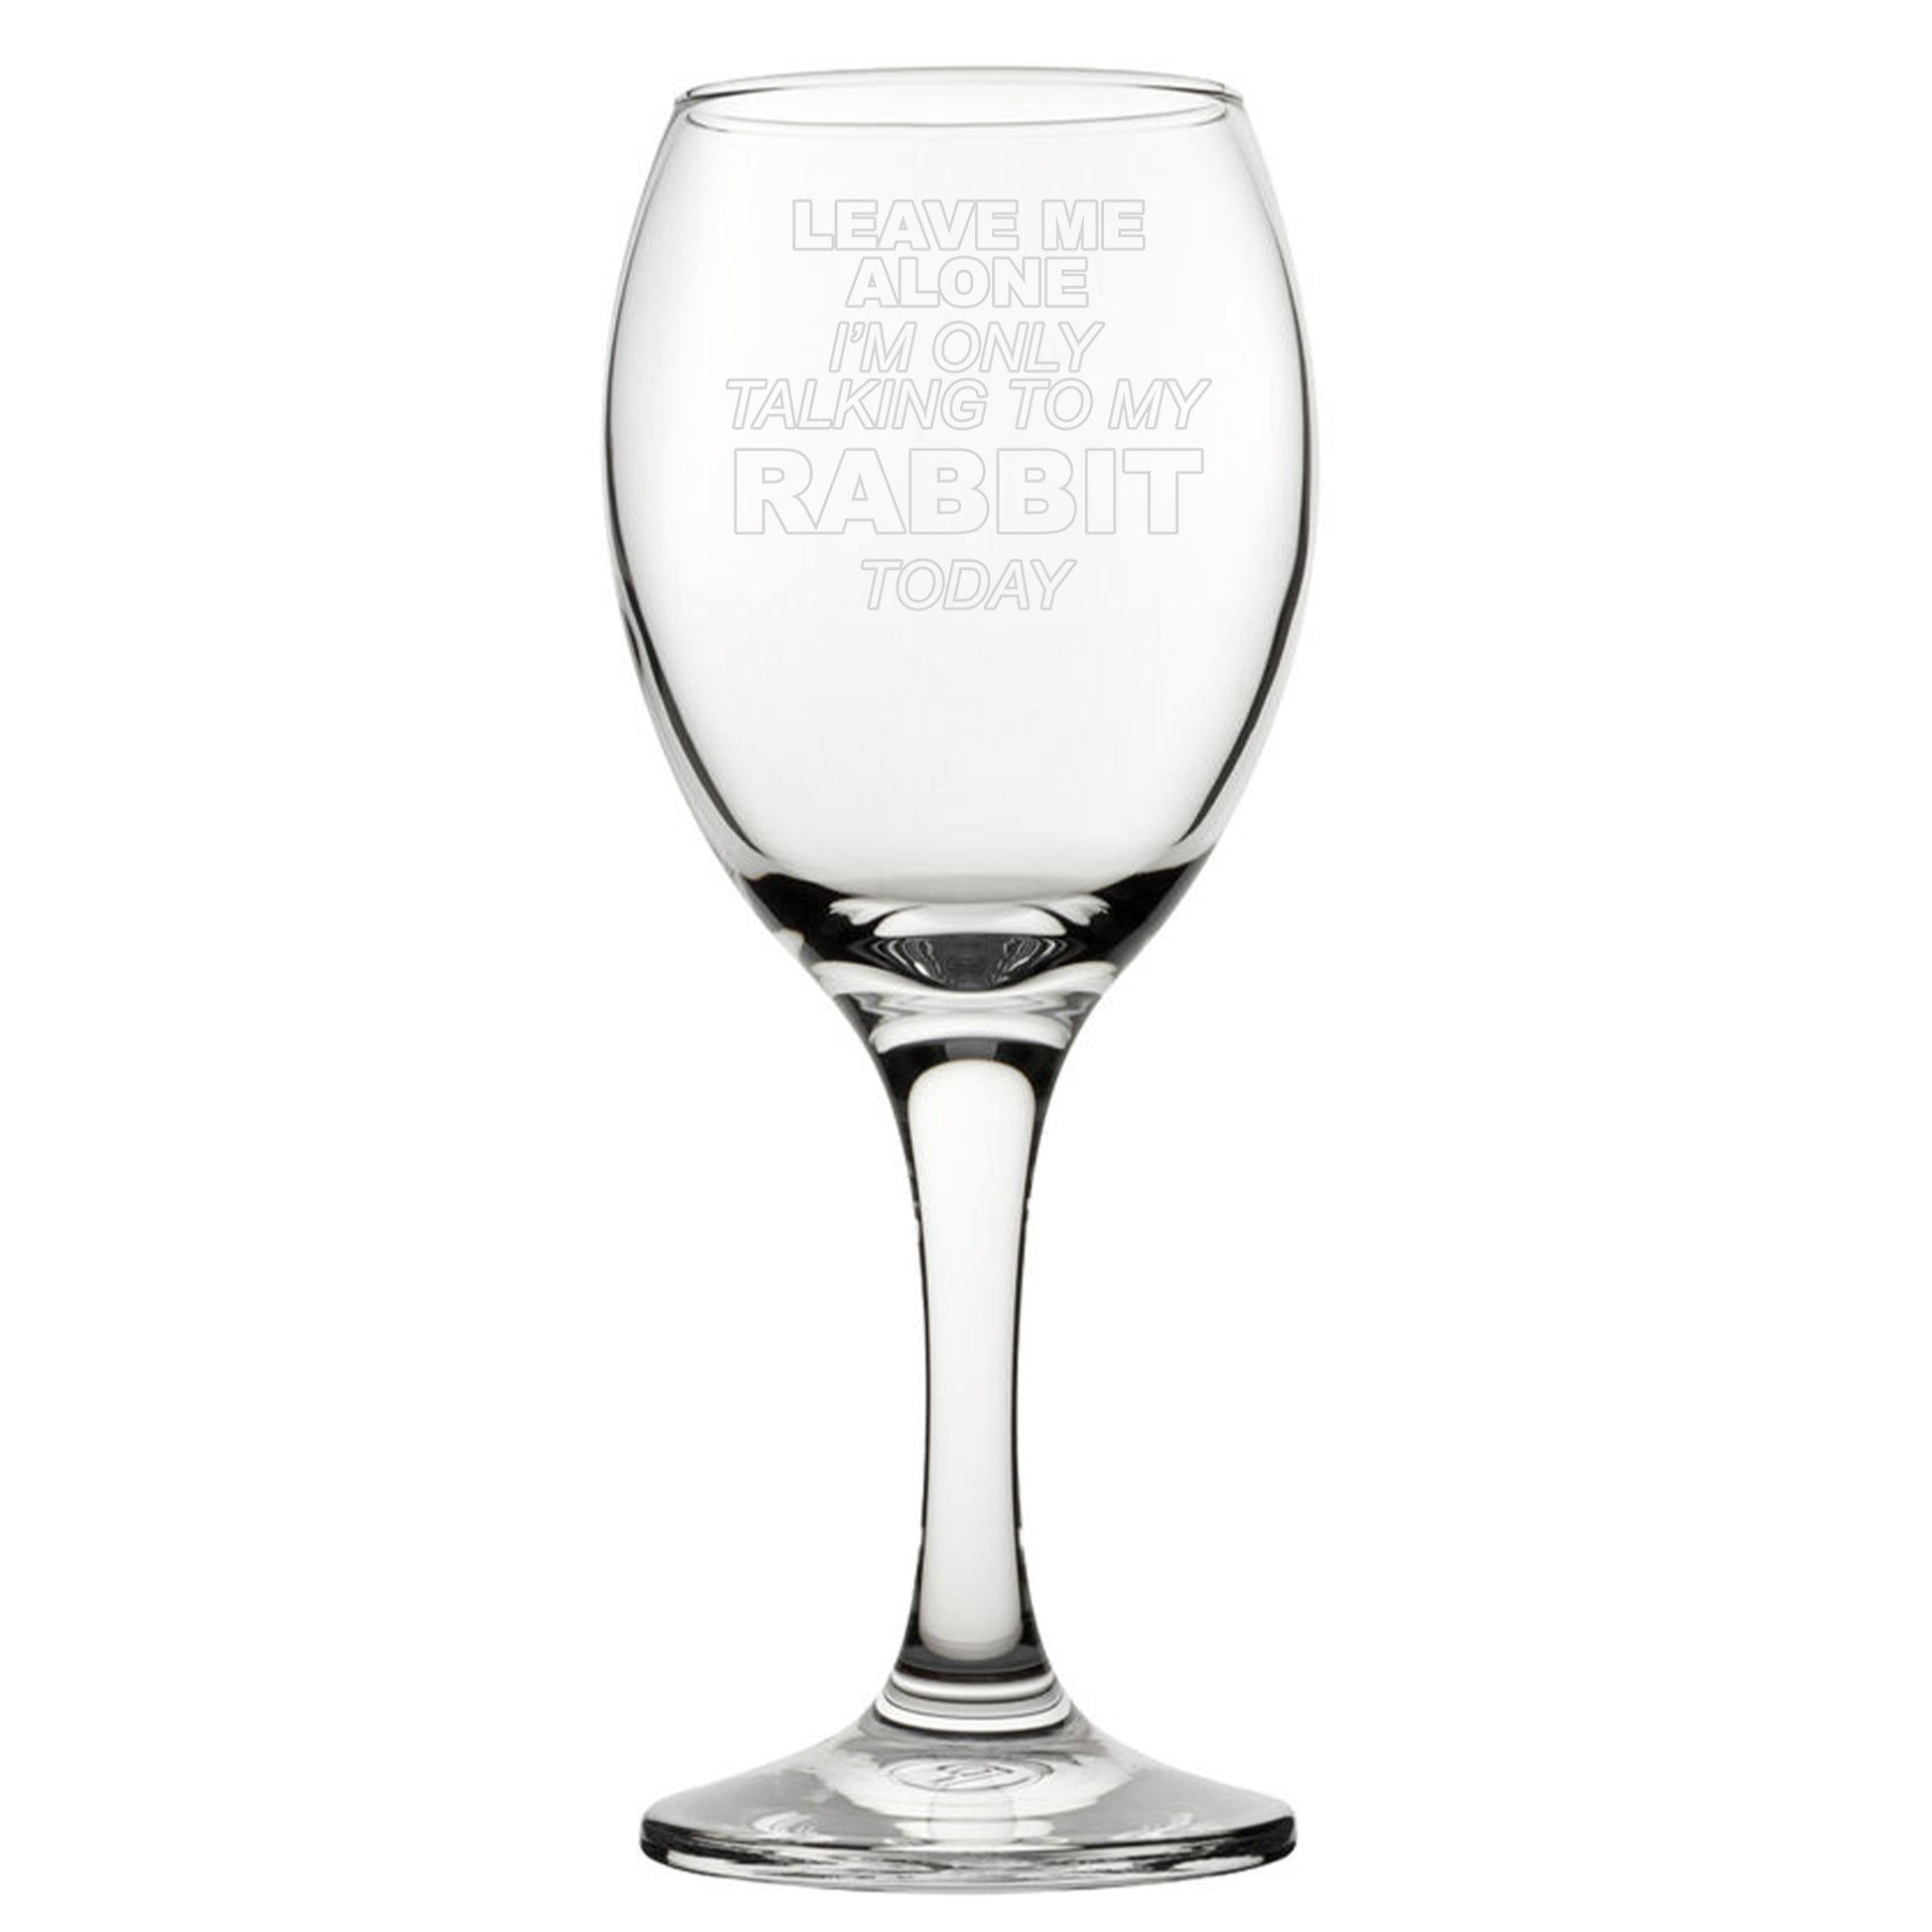 Leave Me Alone I'm Only Talking To My Rabbit Today - Engraved Novelty Wine Glass Image 2